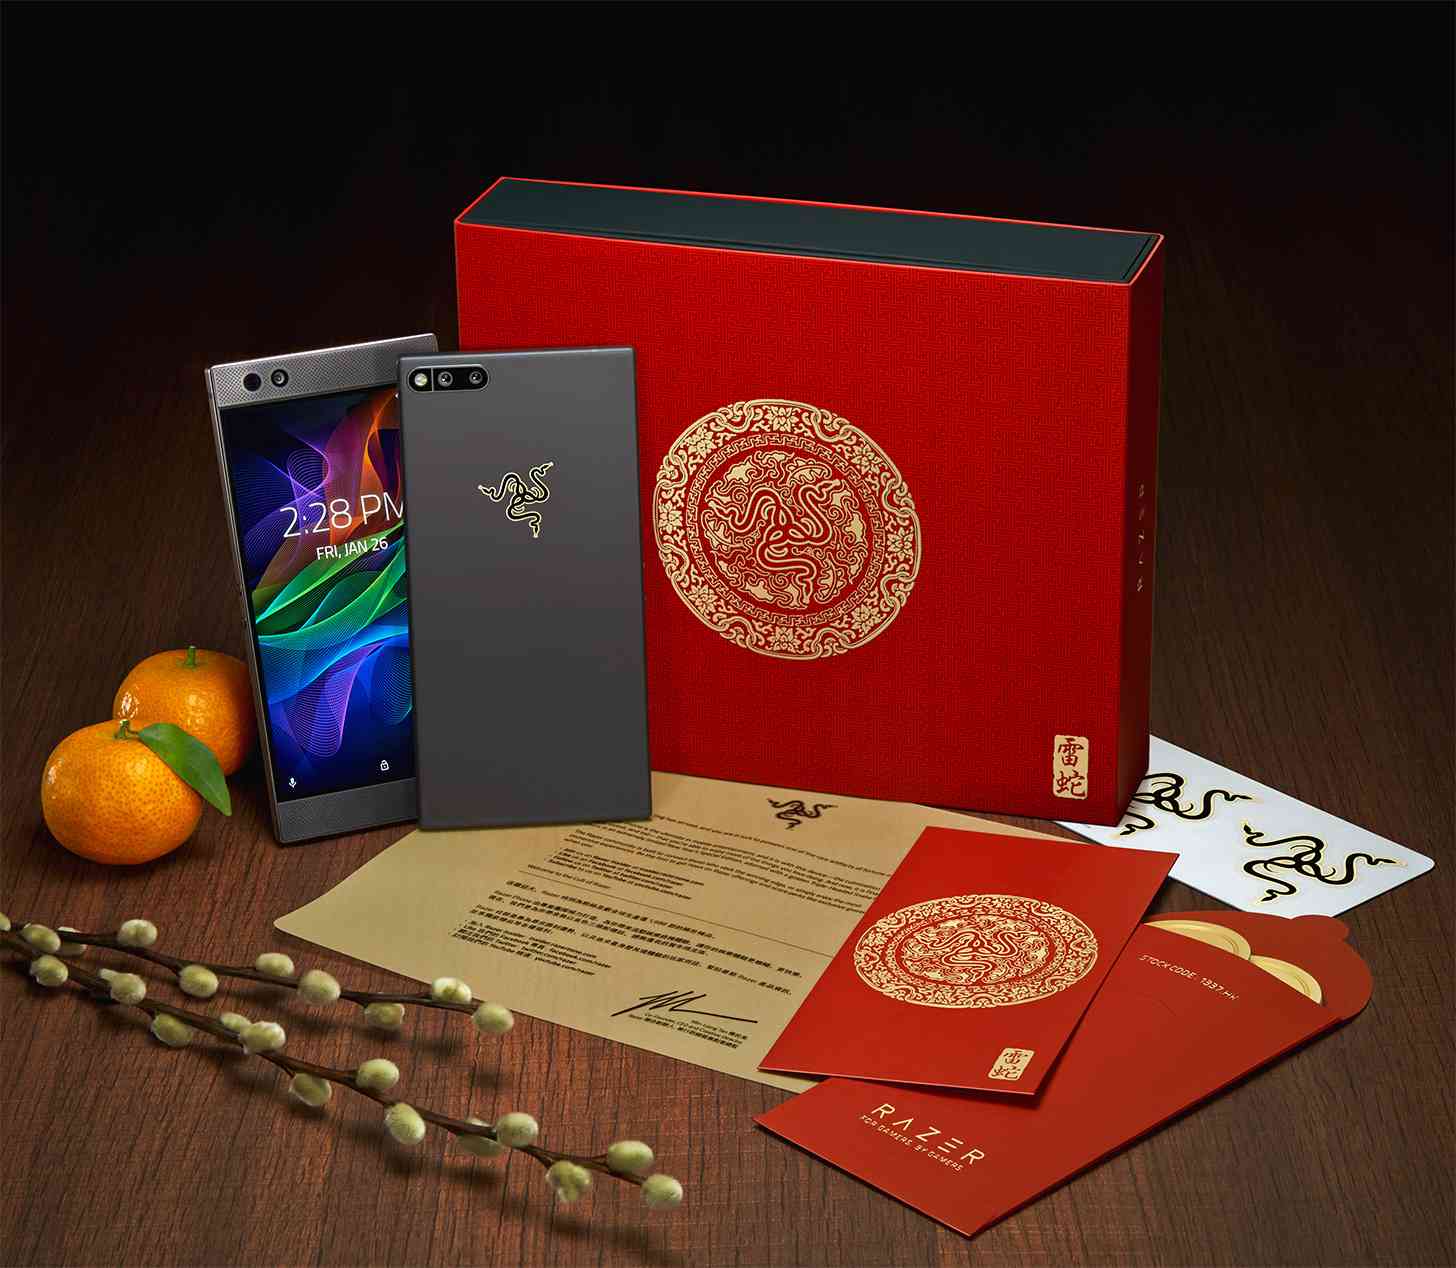 2018 Gold Edition Razer Phone packaging